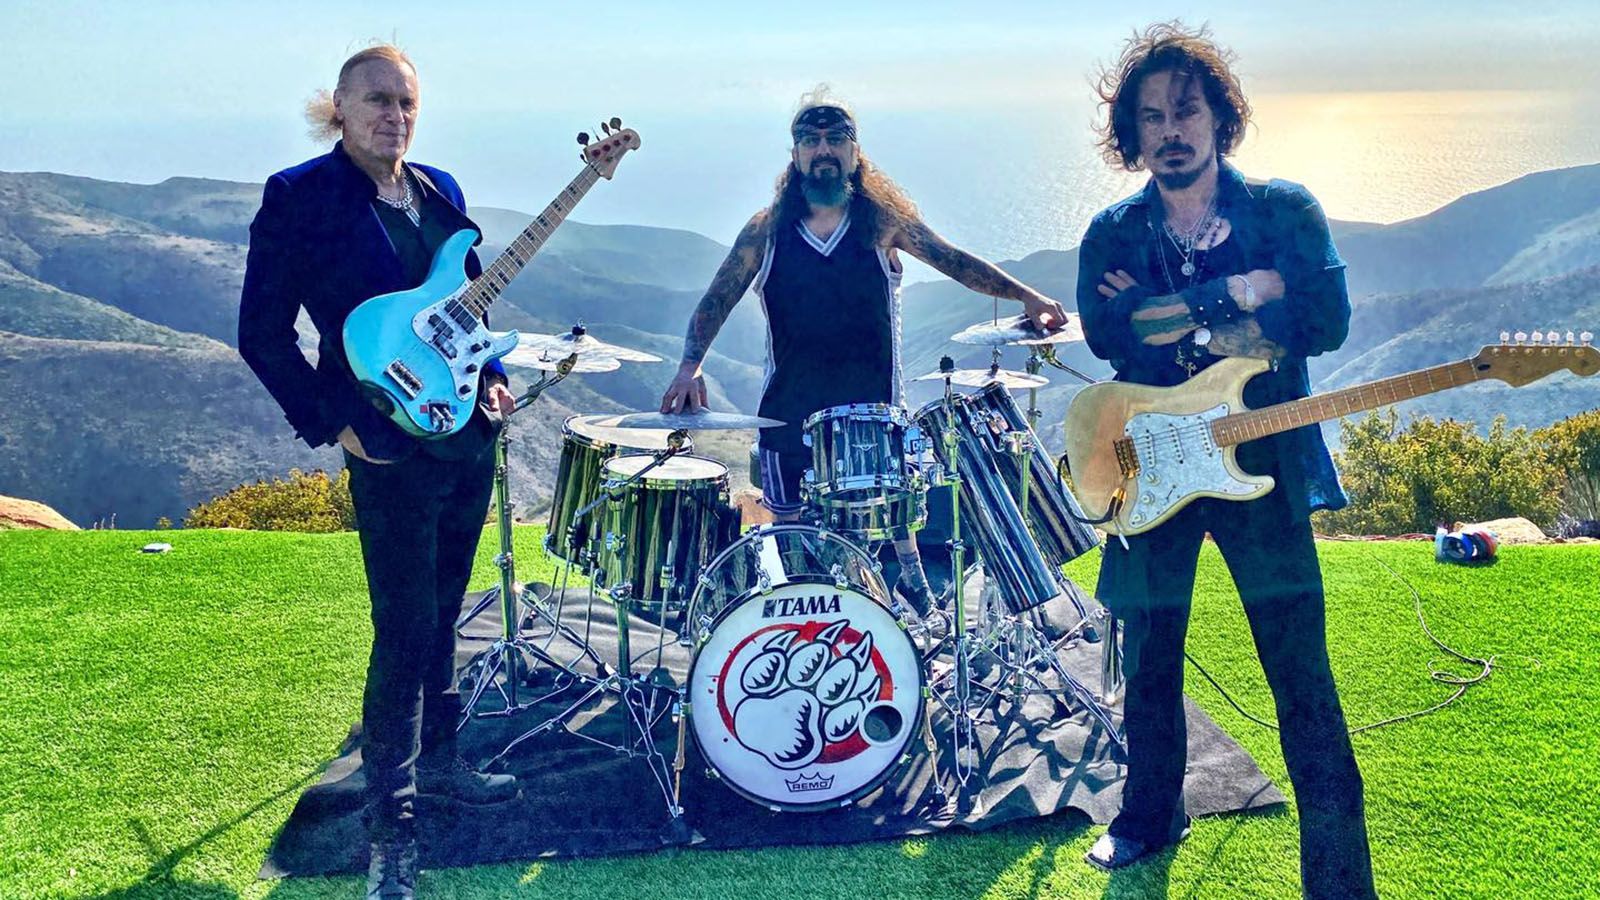 The Winery Dogs will perform at Eagles Theatre in Wabash on March 3.